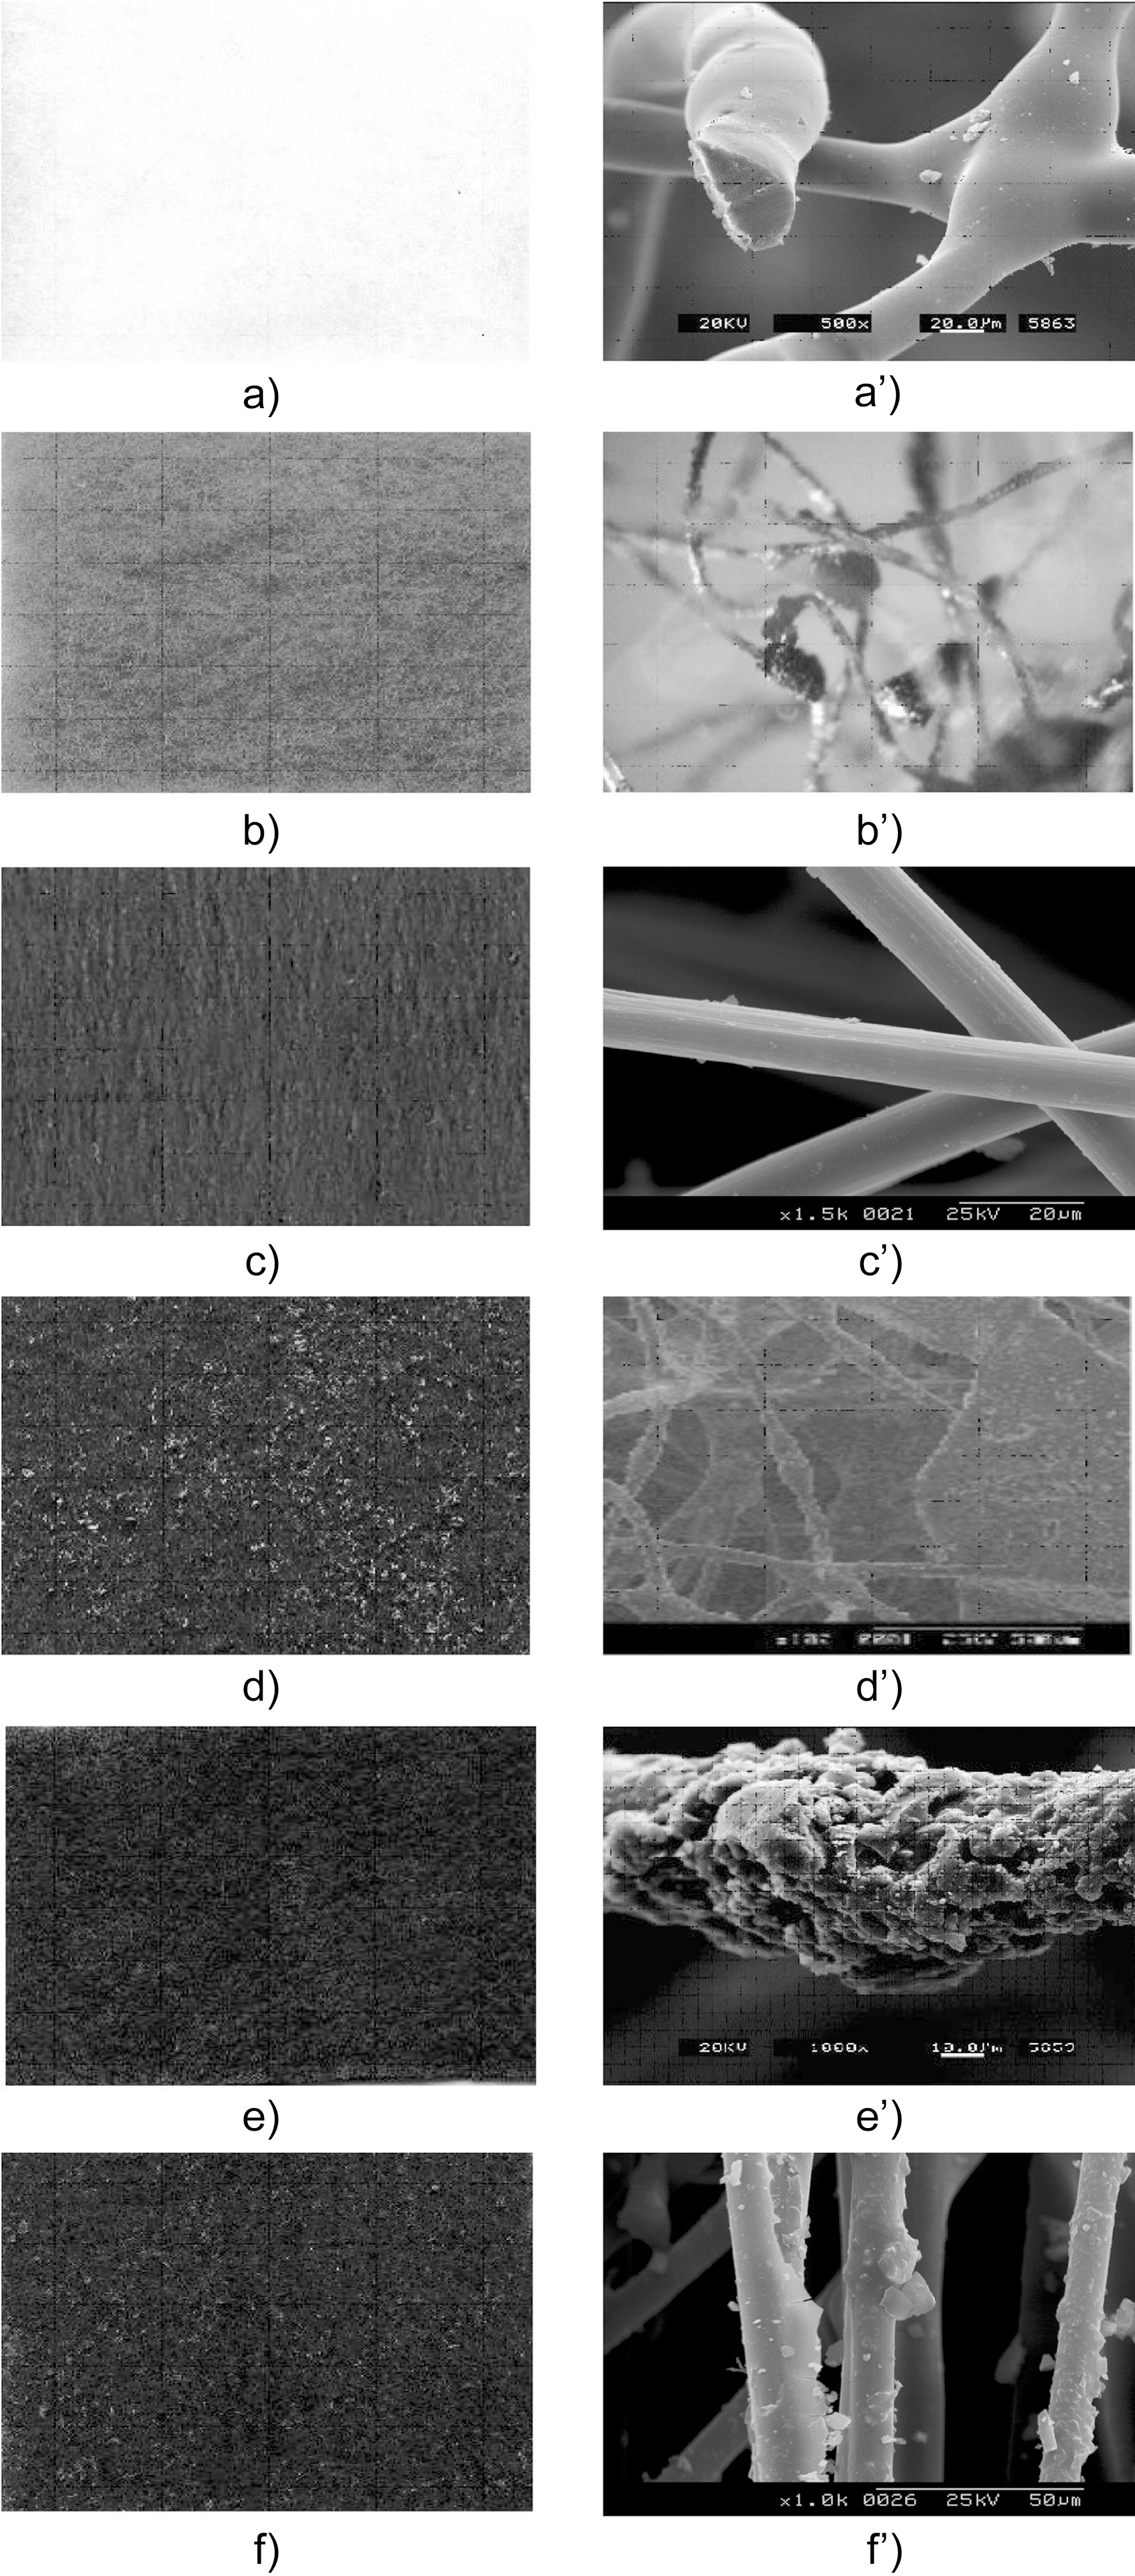 a) PE-nonwoven fabrics b) thermostable fabrics c)Sigri-thermospelz d~f) their AC-immobilized adsorption filters and :a’~ f’) thier magnification of SEM photos.